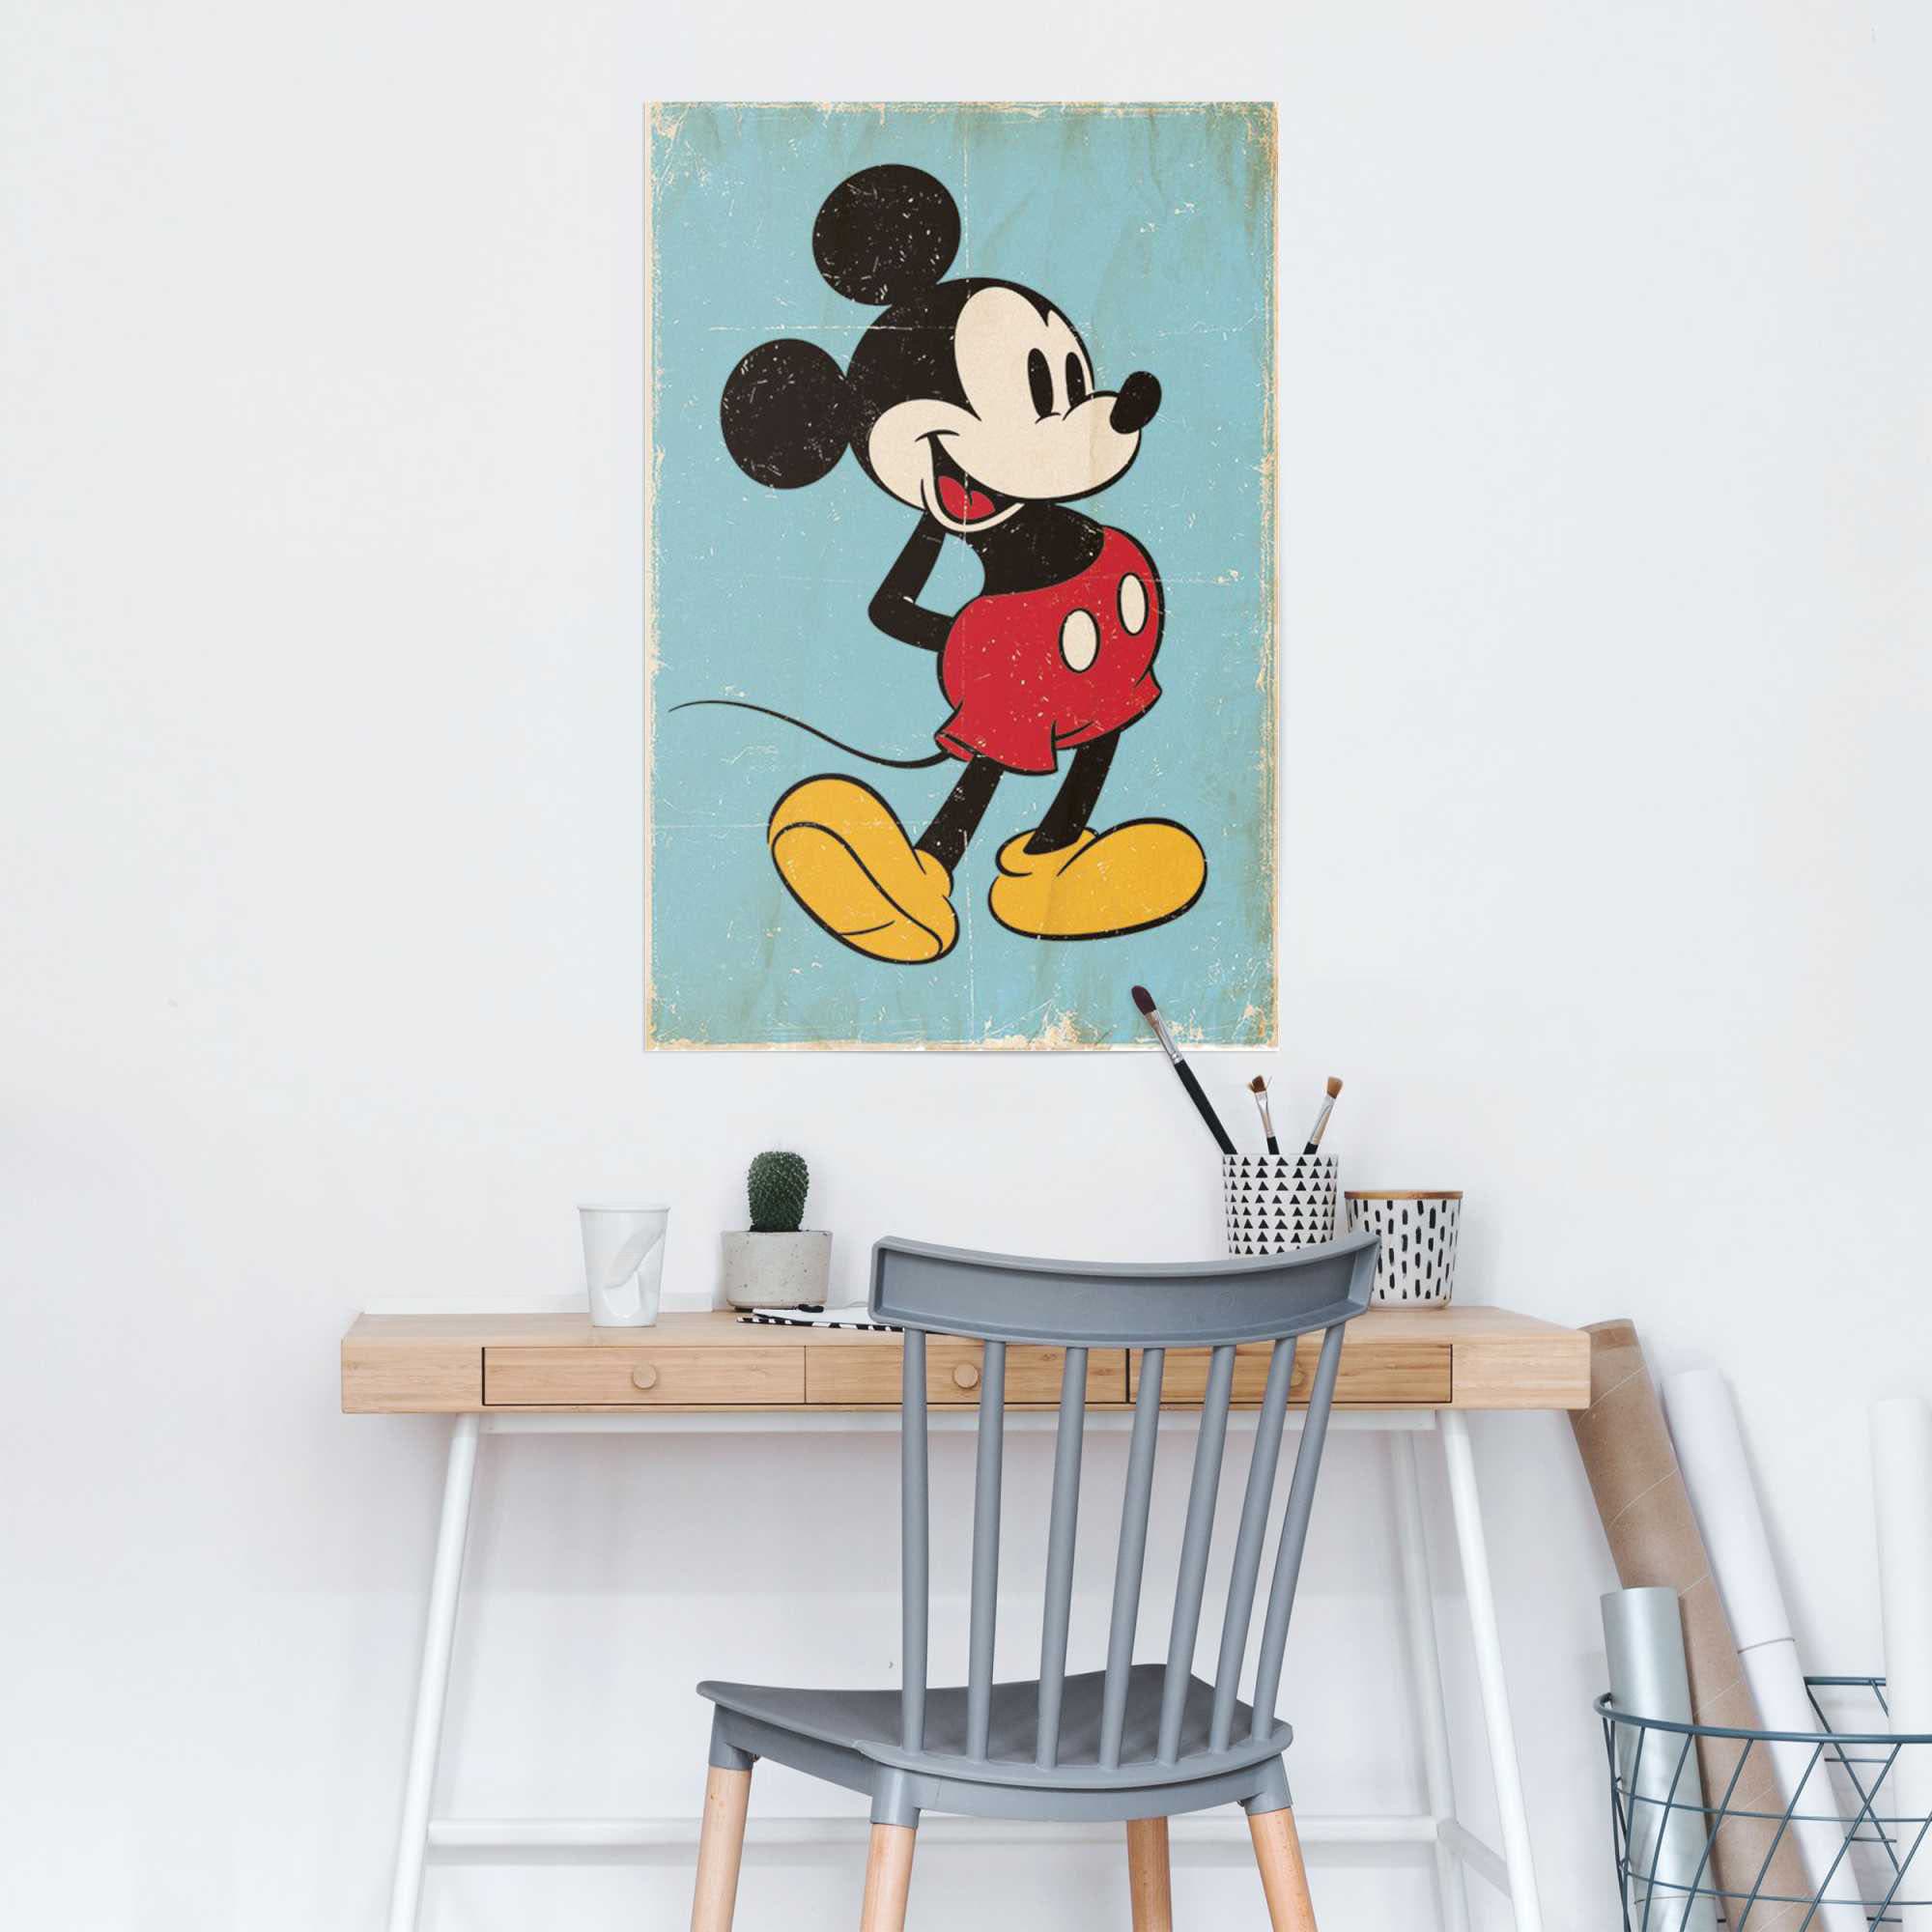 (1 Poster retro«, St.) jetzt Mouse »Mickey Reinders! kaufen